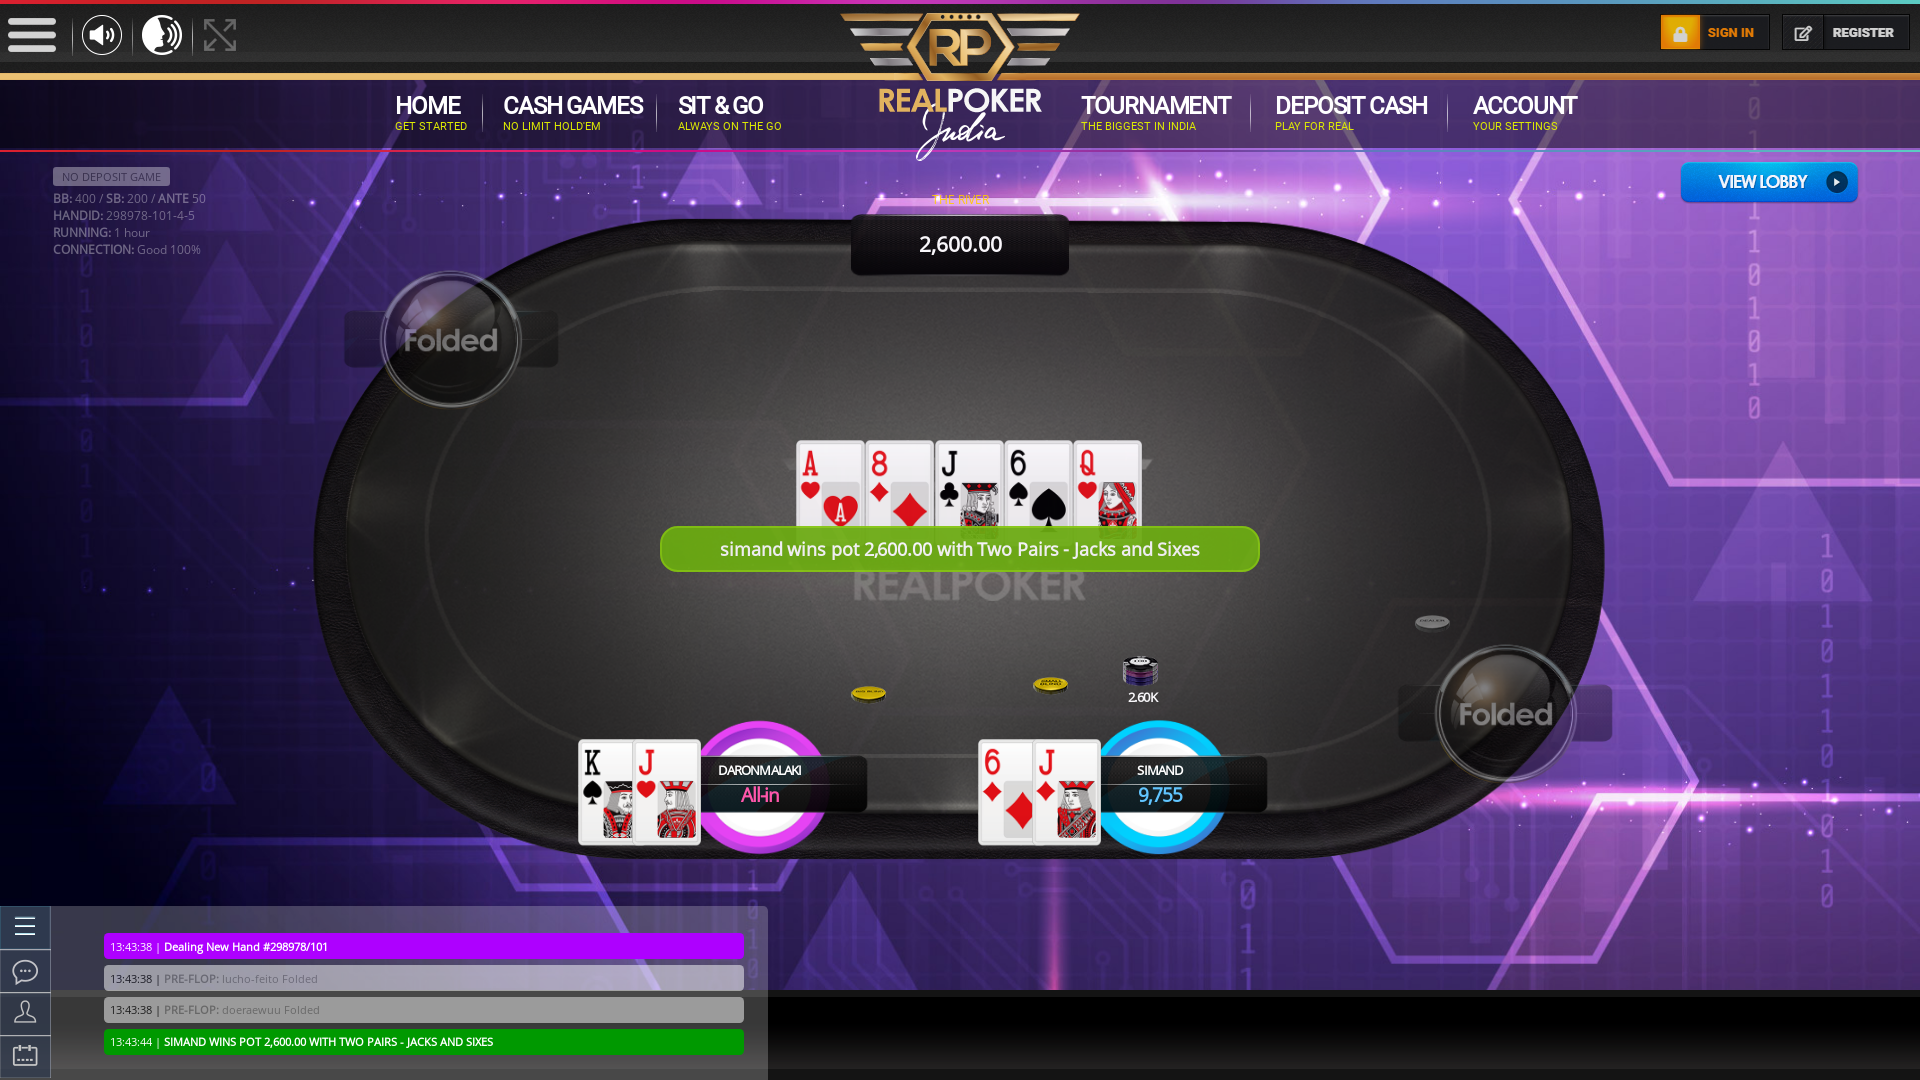 The 102nd hand dealt between daronmalaki, doeraewuu, lucho-feito, simand,  on poker india